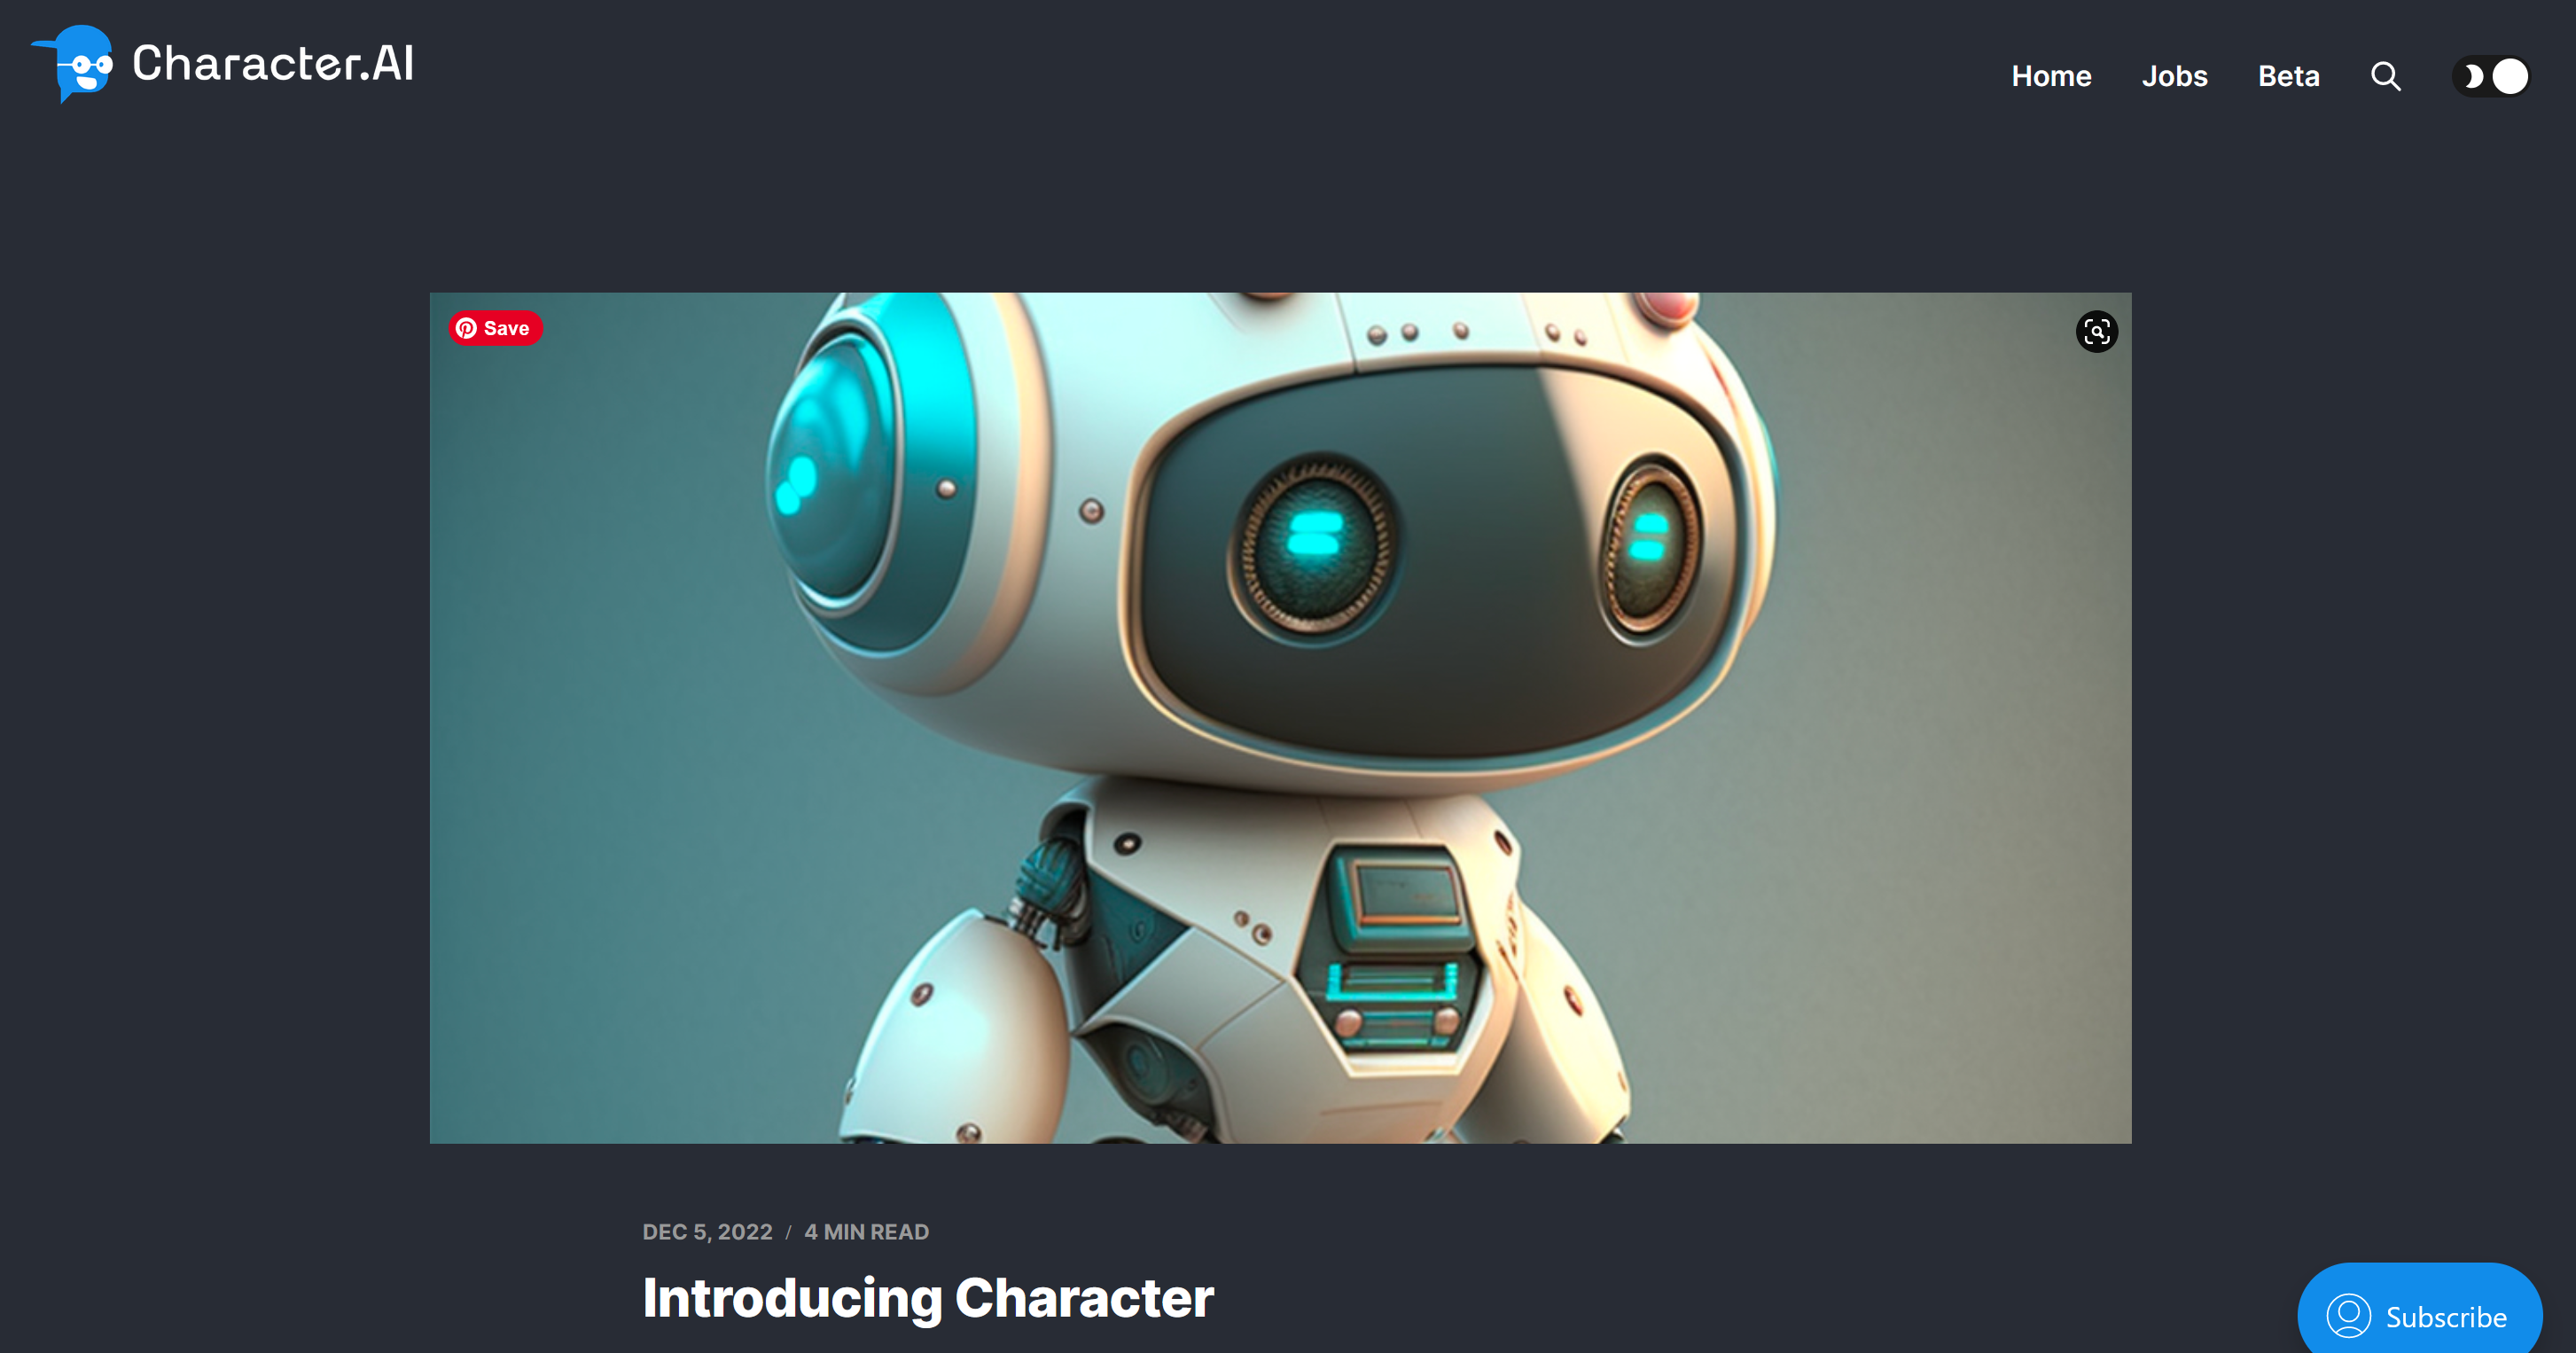 @katerinaramm/how-about-creating-your-own-ai-powered-assistant-presenting-character-ai